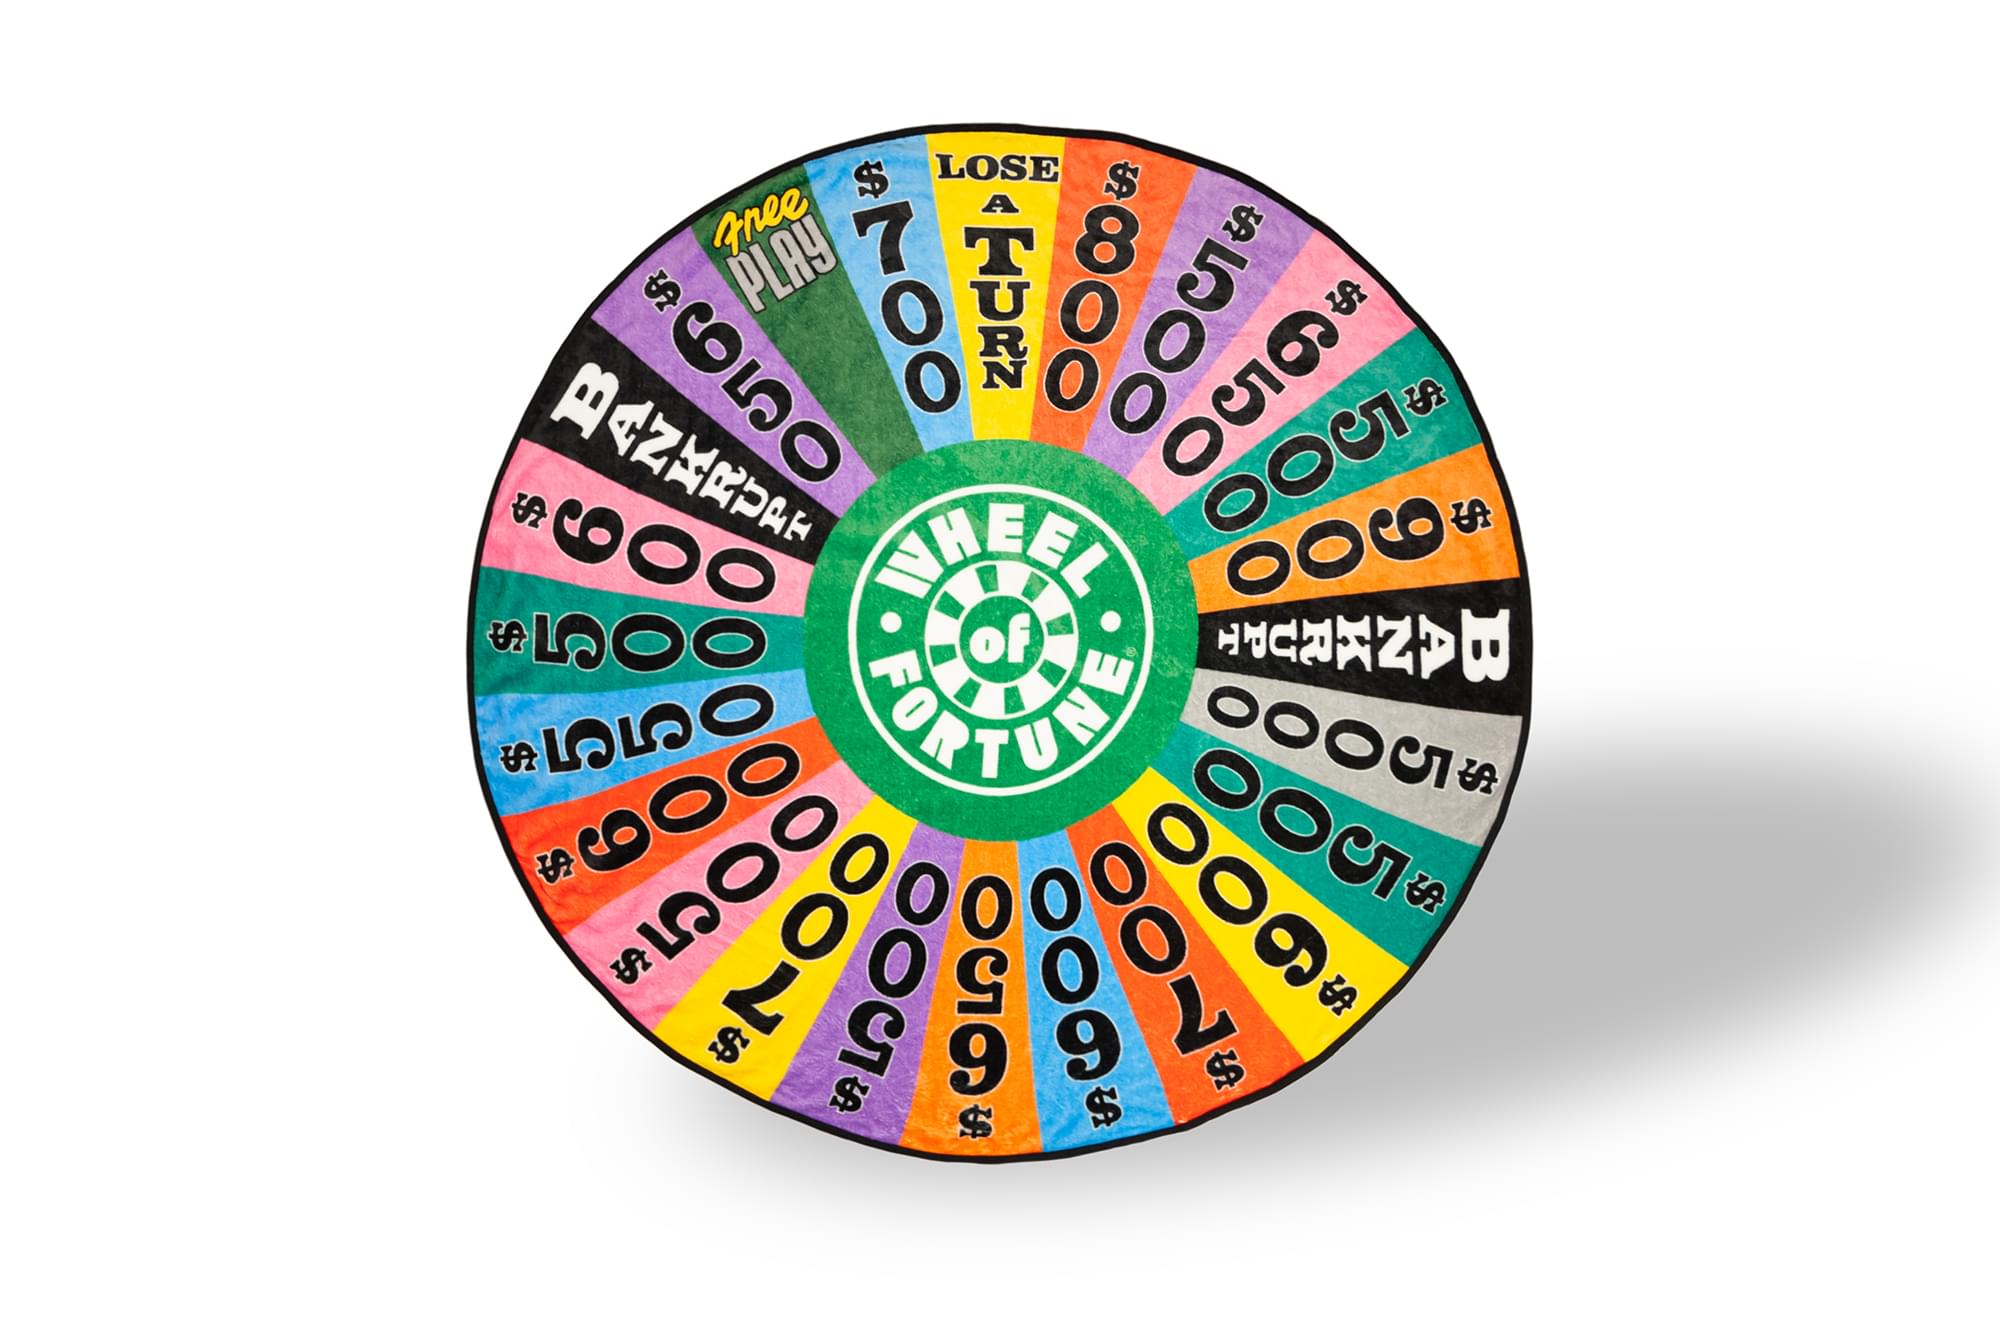 New Wheel merch coming soon to Toynk Buy a Vowel Boards